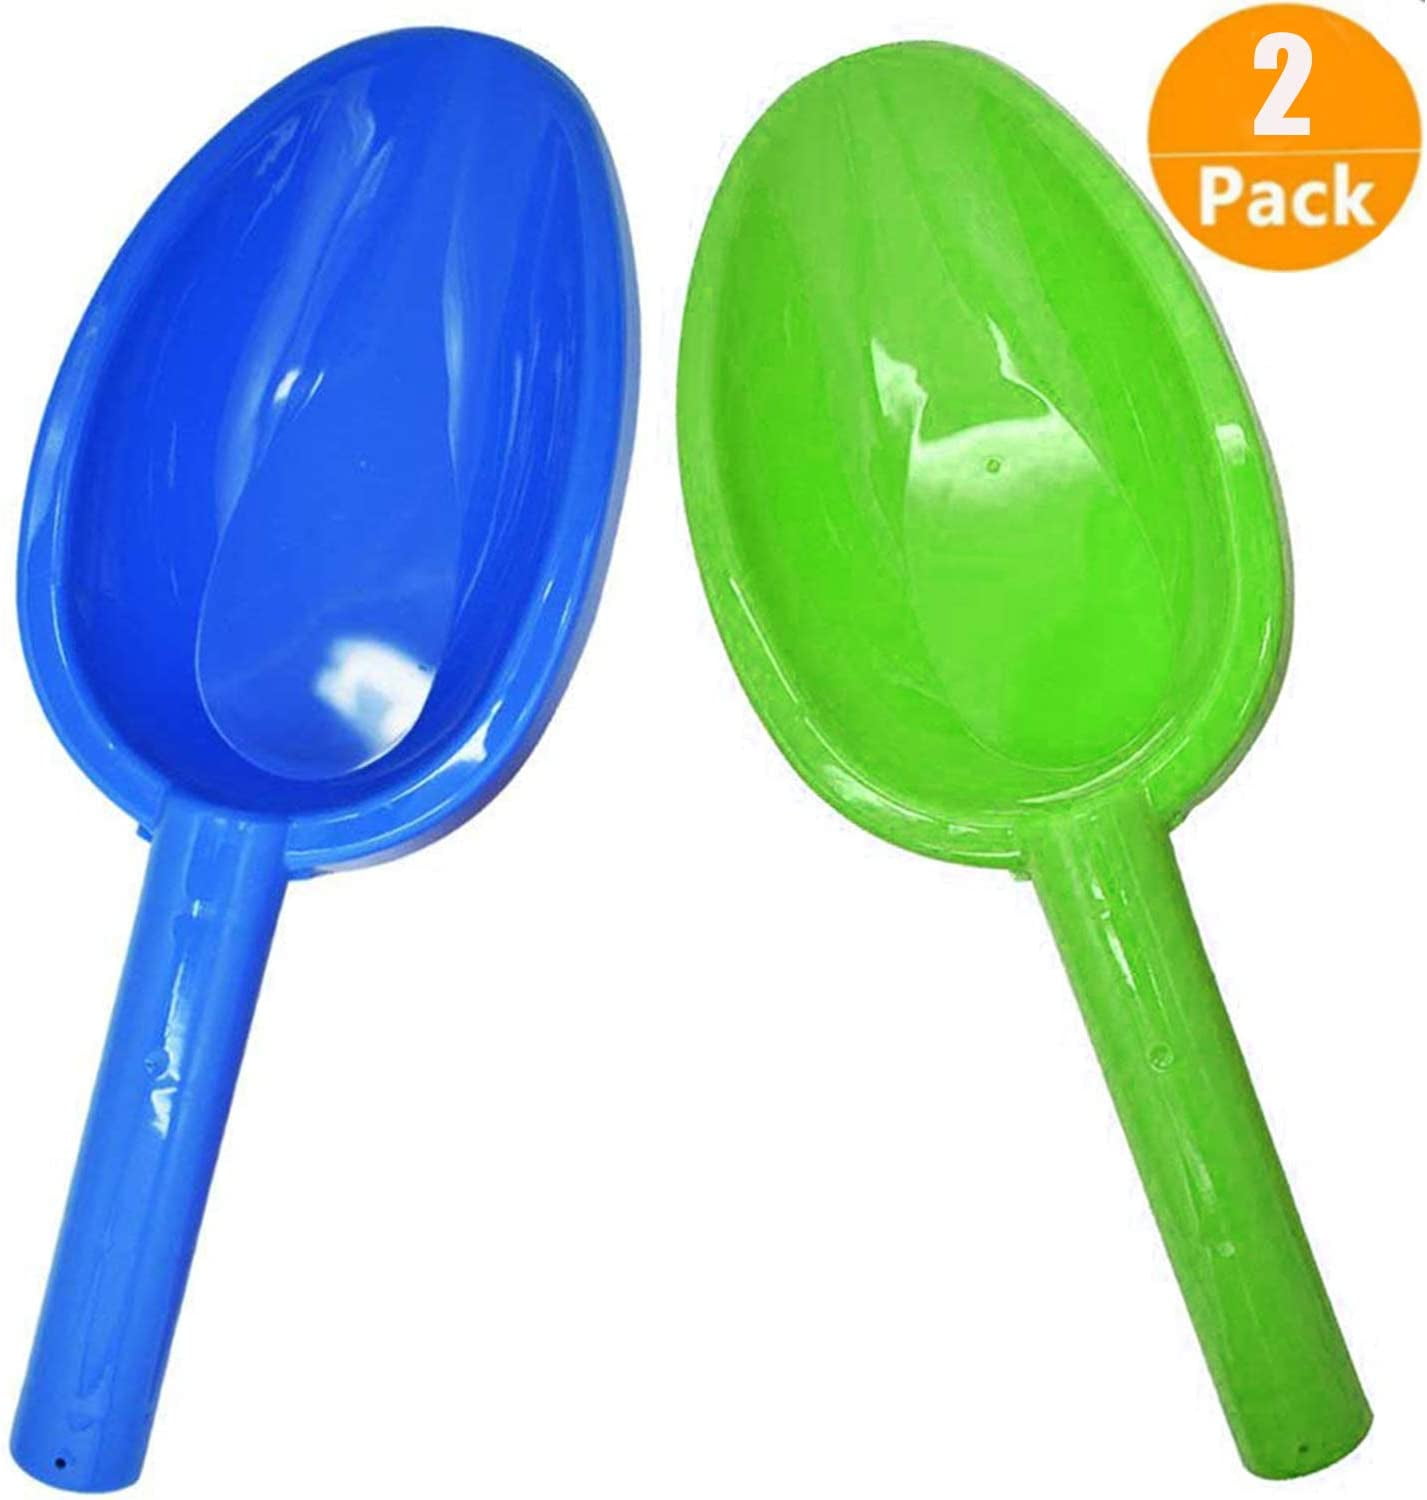 Jumbo Large Size 14 Kids Toy Snow Sand Shovels Beach Sturdy Sand Scoop Plastic Shovels Toy Spade for Sand&Snow Beach Kids Teenagers 2 Pack Blue&Green 